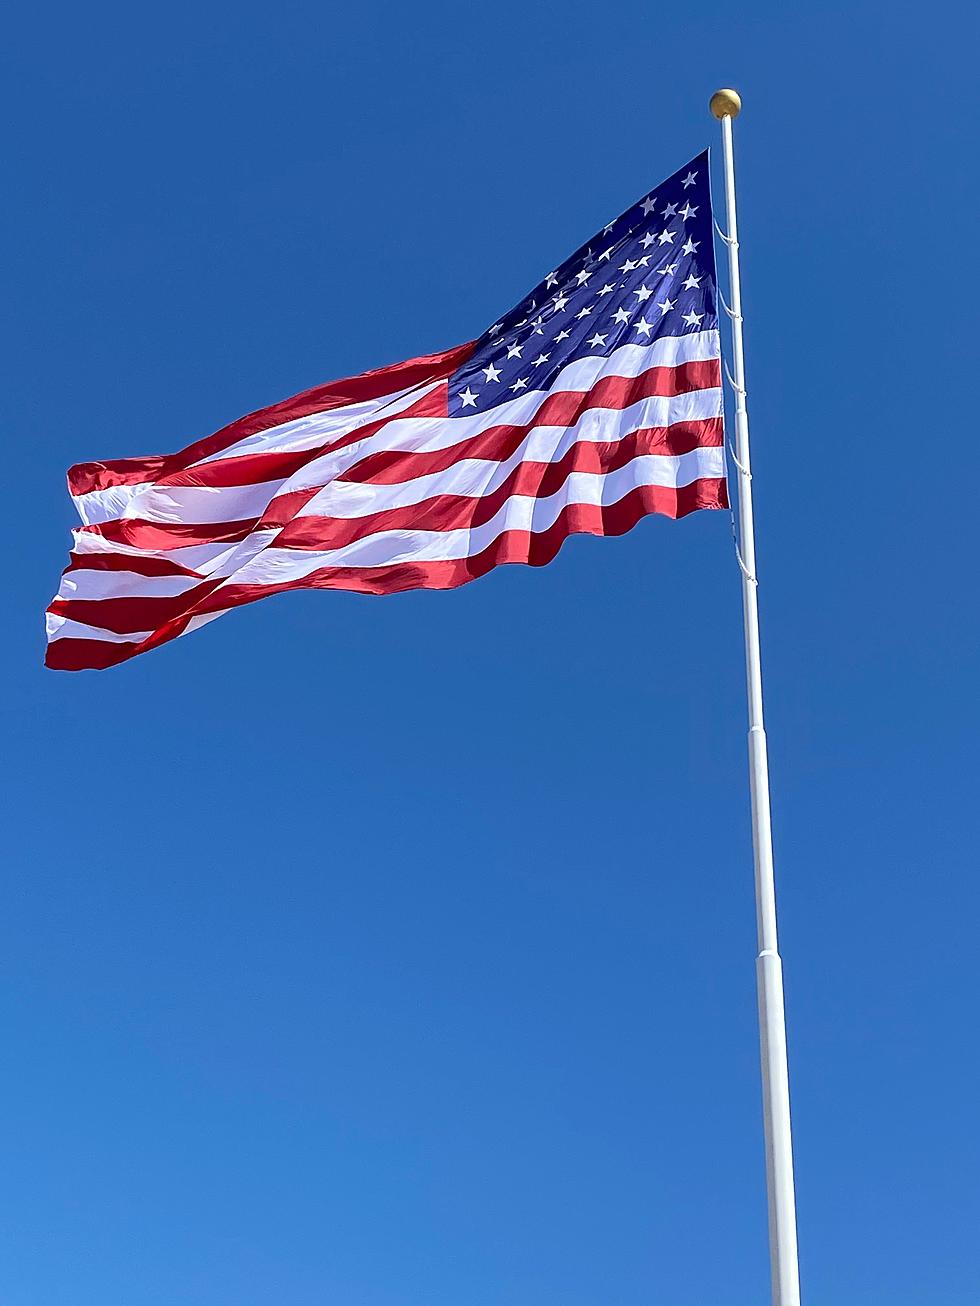 Why The Flag at El Paso&#8217;s Old Glory Memorial Needs To Keep Flying